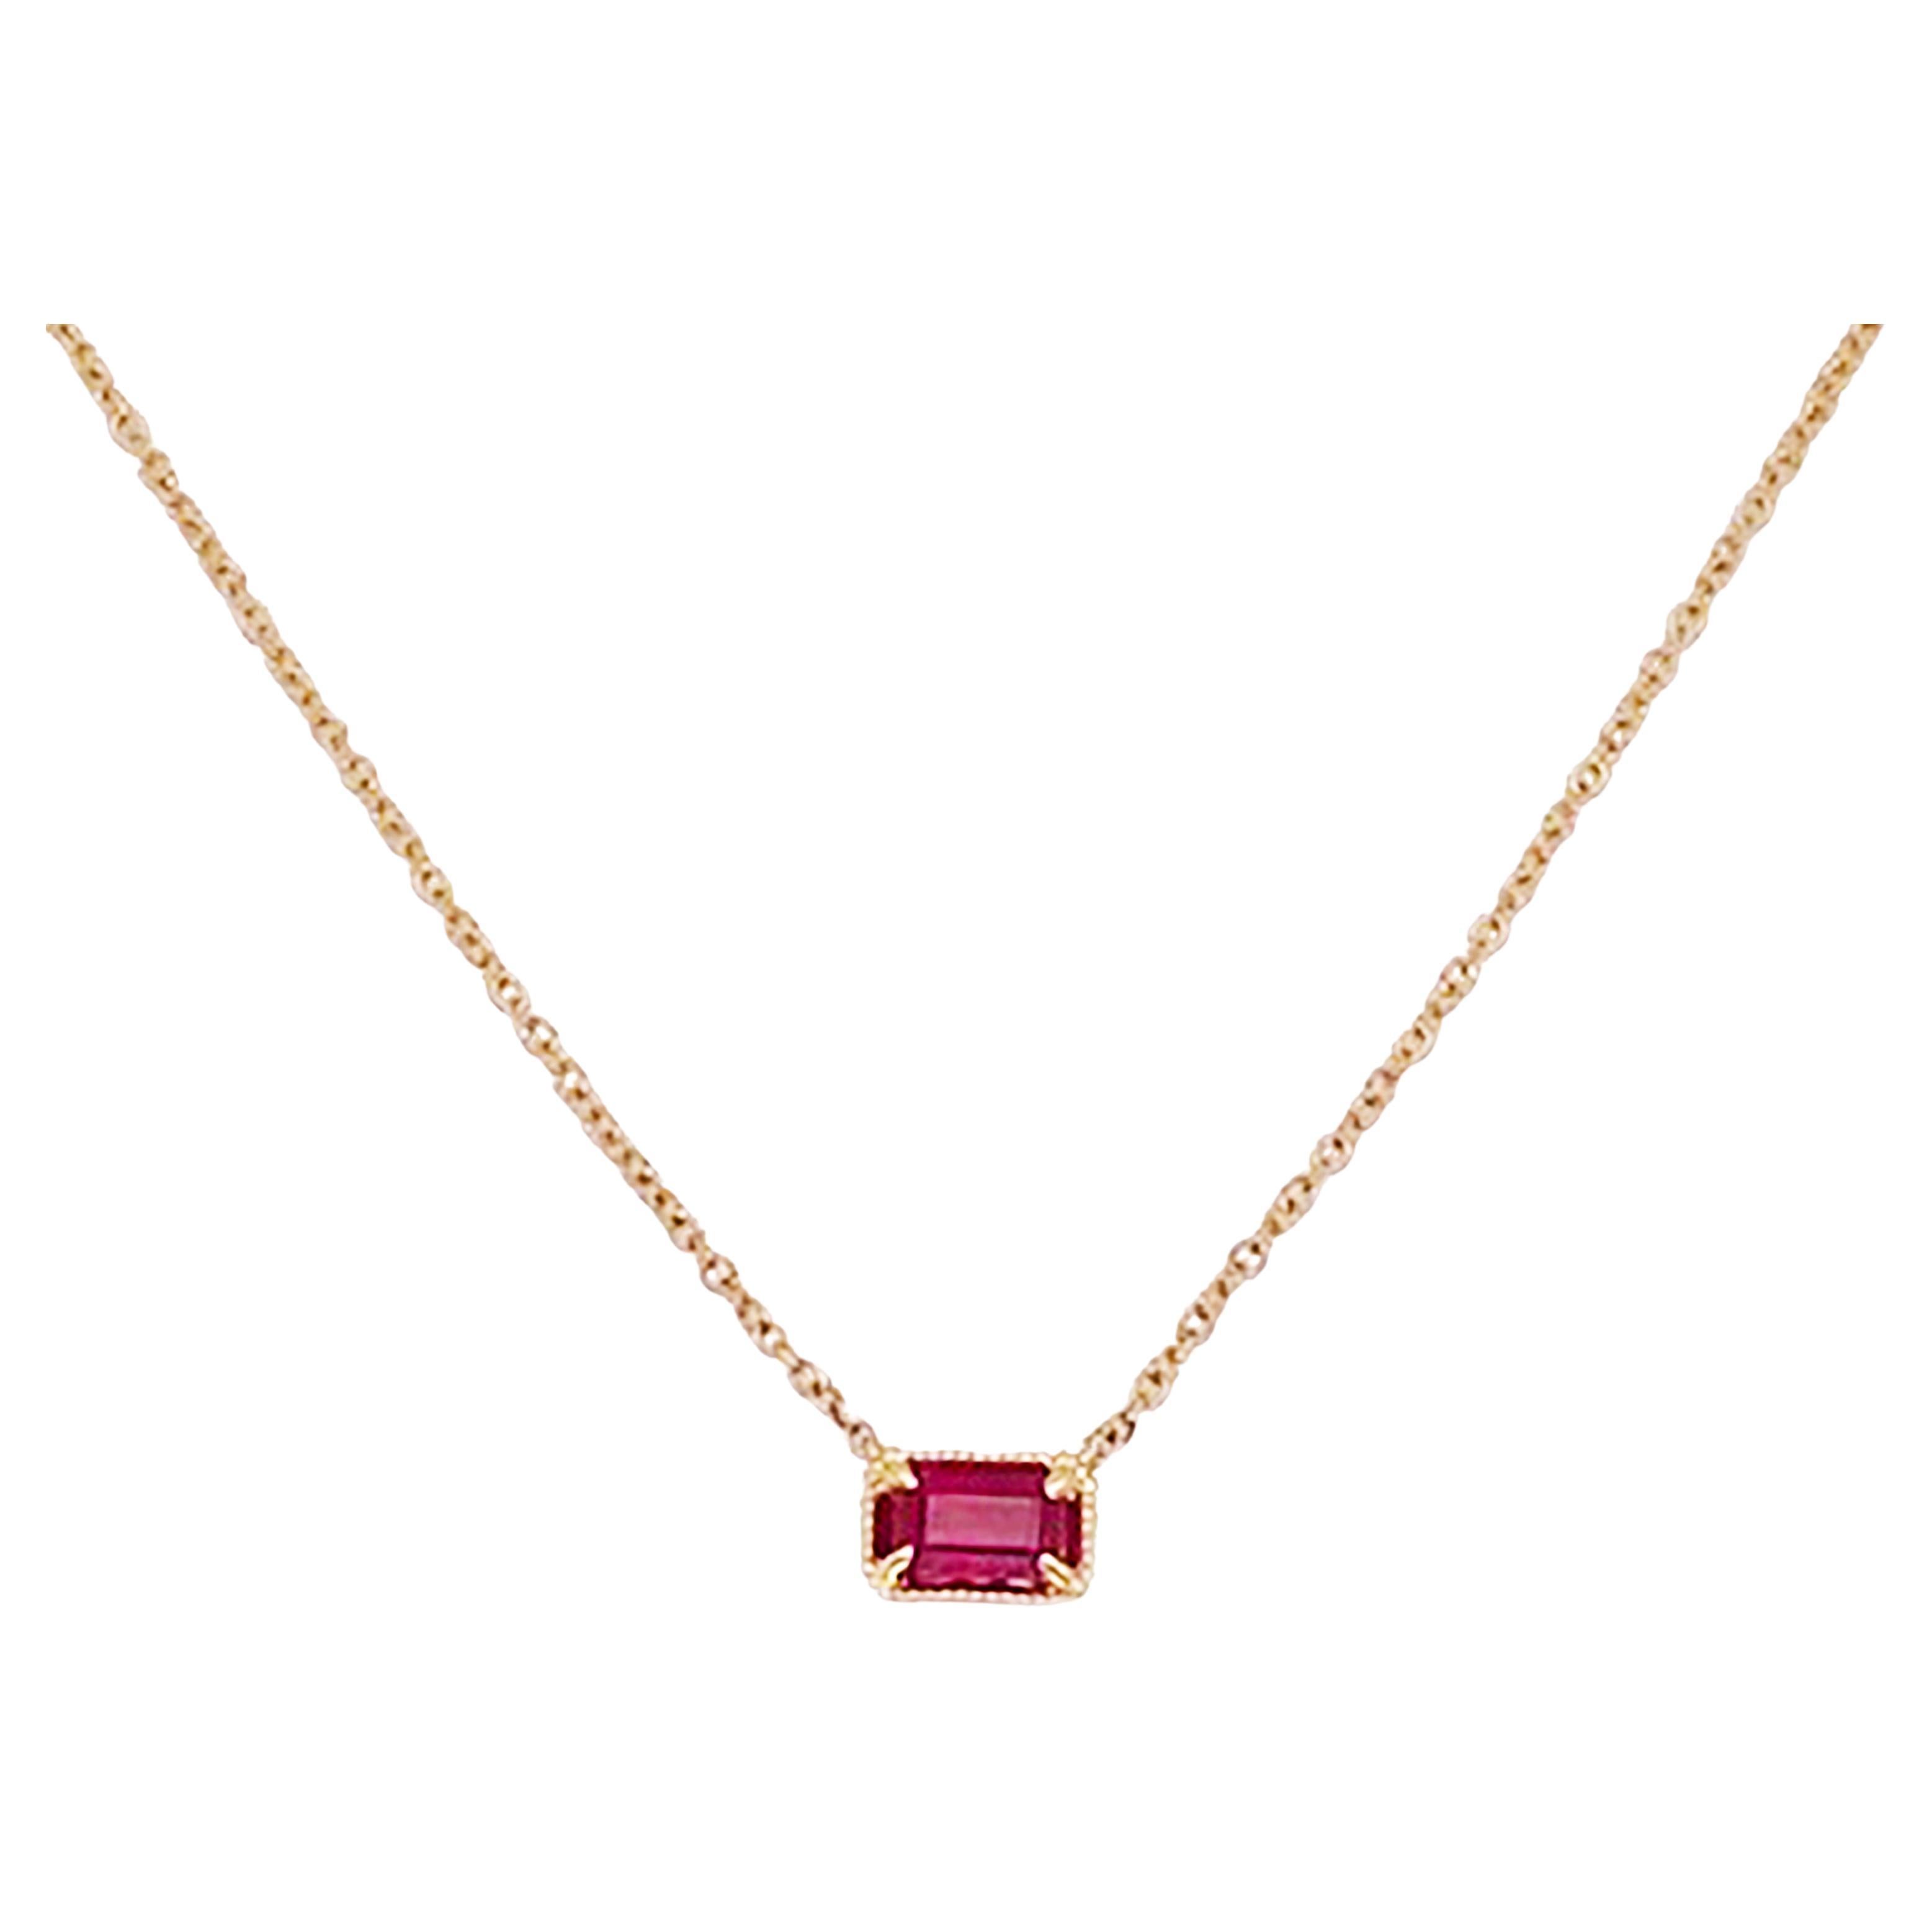 Ruby Necklace 14K Gold Emerald Cut .34 Carat Ruby Gemstone July Pendant For Sale